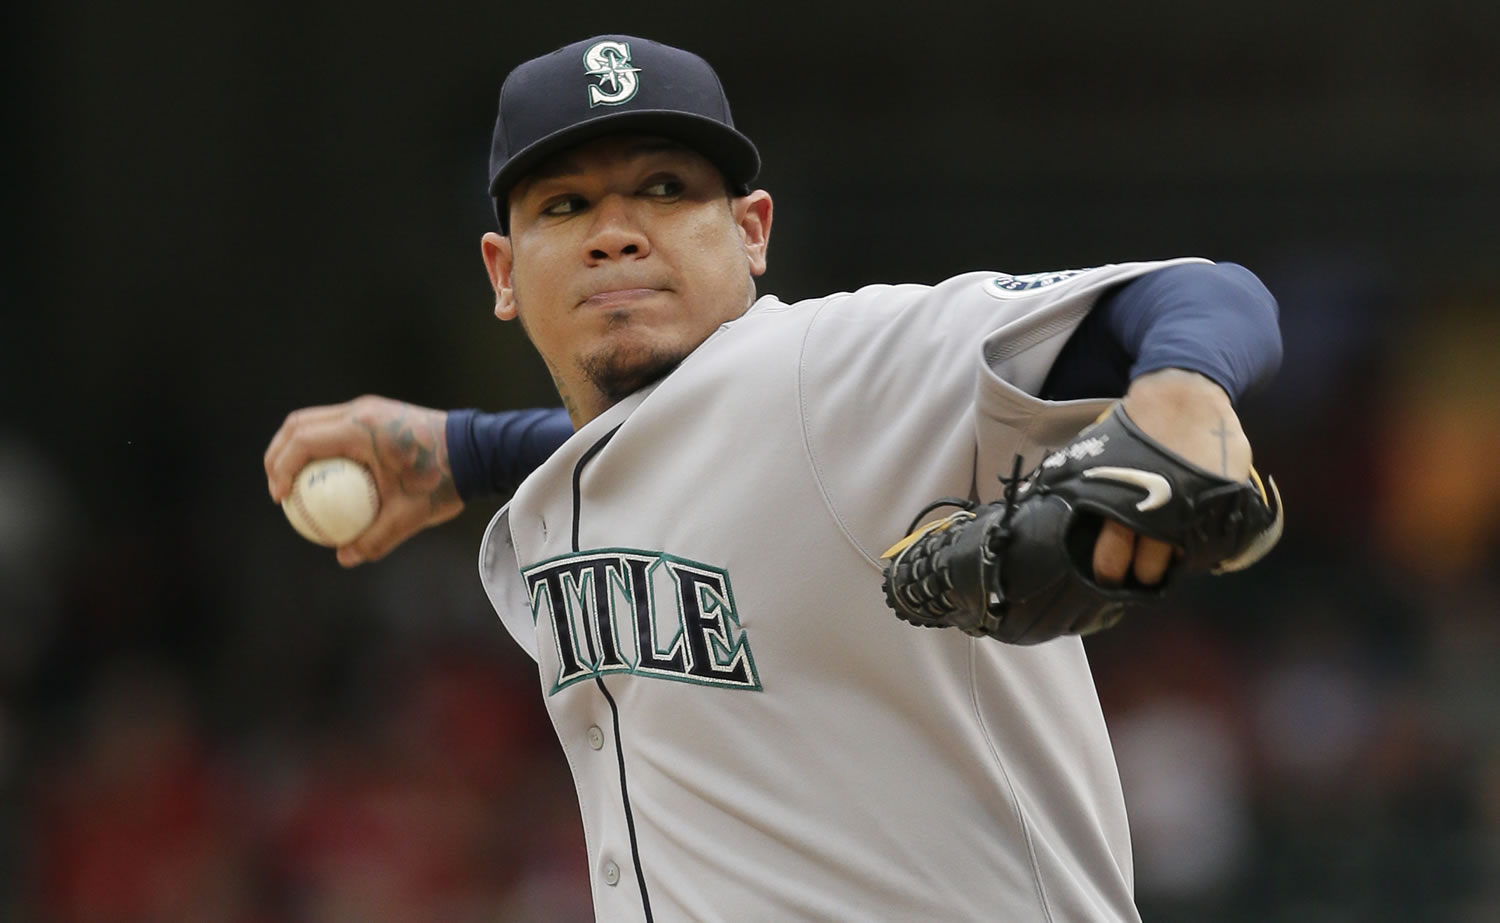 Felix Hernandez gave up two runs, struck out five and matched a season high with five walks against the Texas Rangers in Arlington, Texas, on Sunday, Sept. 20, 2015.